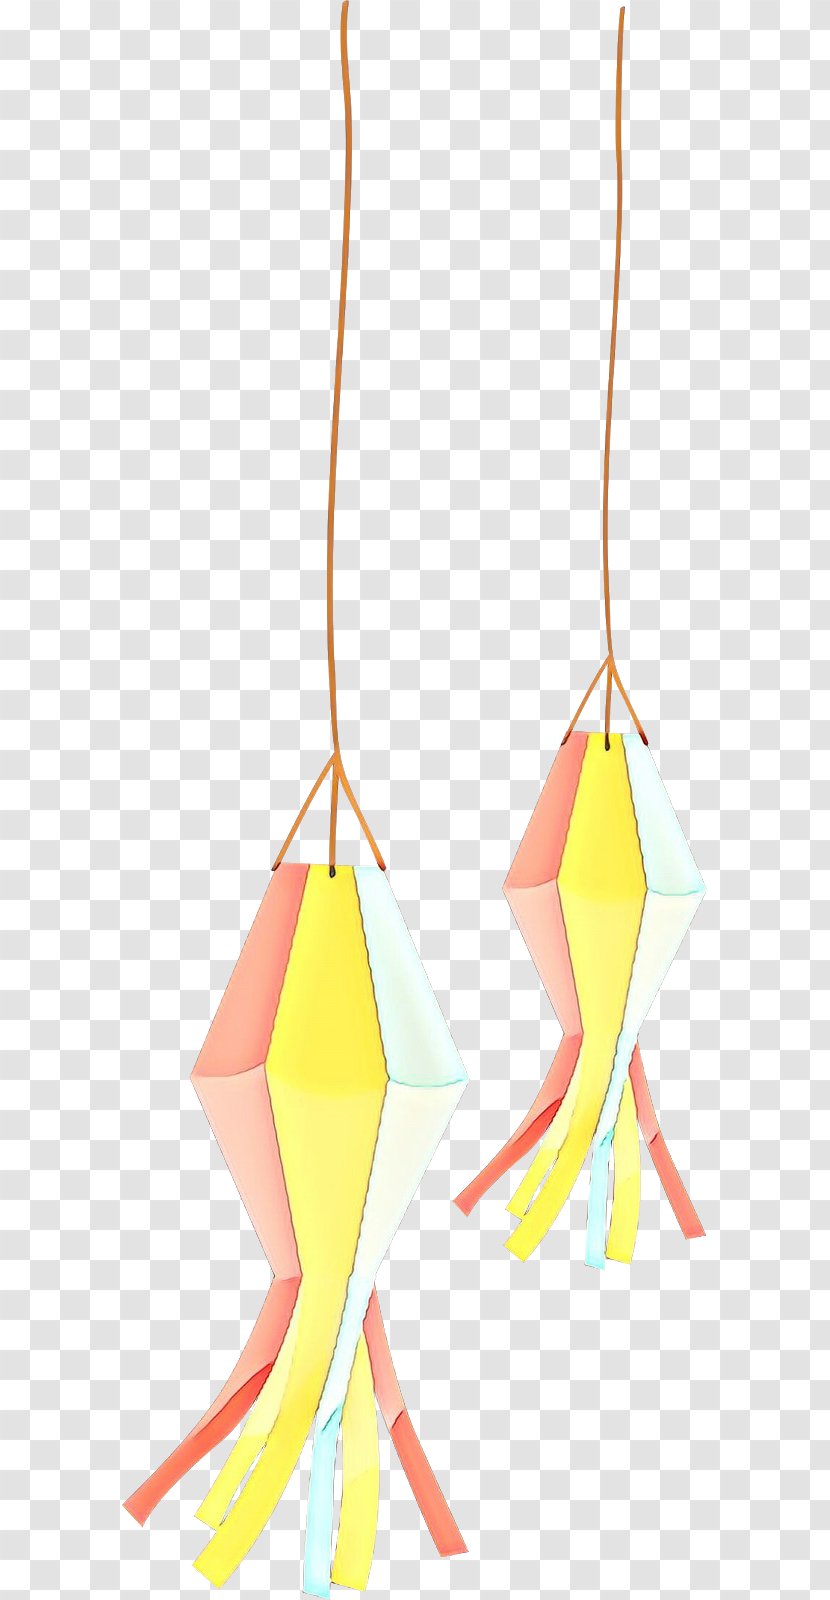 Yellow Triangle Paper Product - Swimsuit Top Transparent PNG